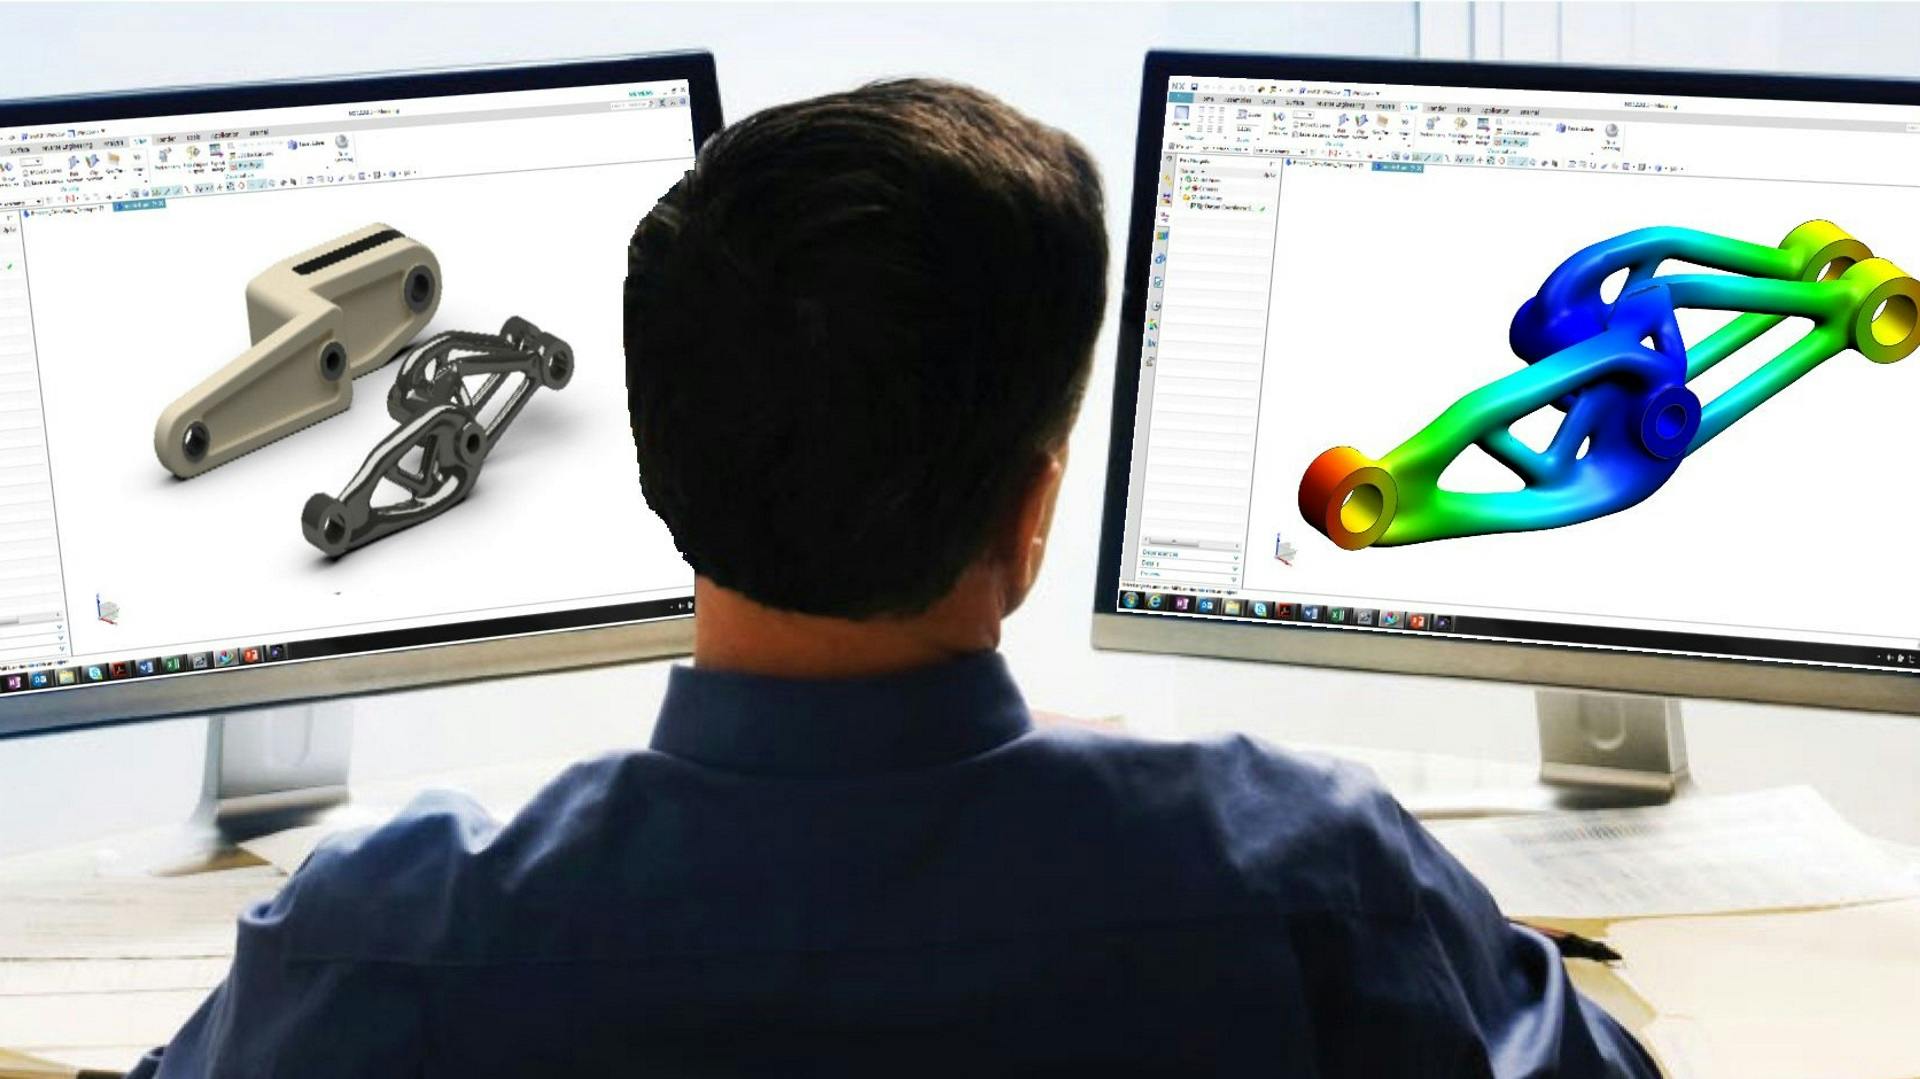 Industrializing Additive Manufacturing 3D Printing through an Integrated, End-to-end Process